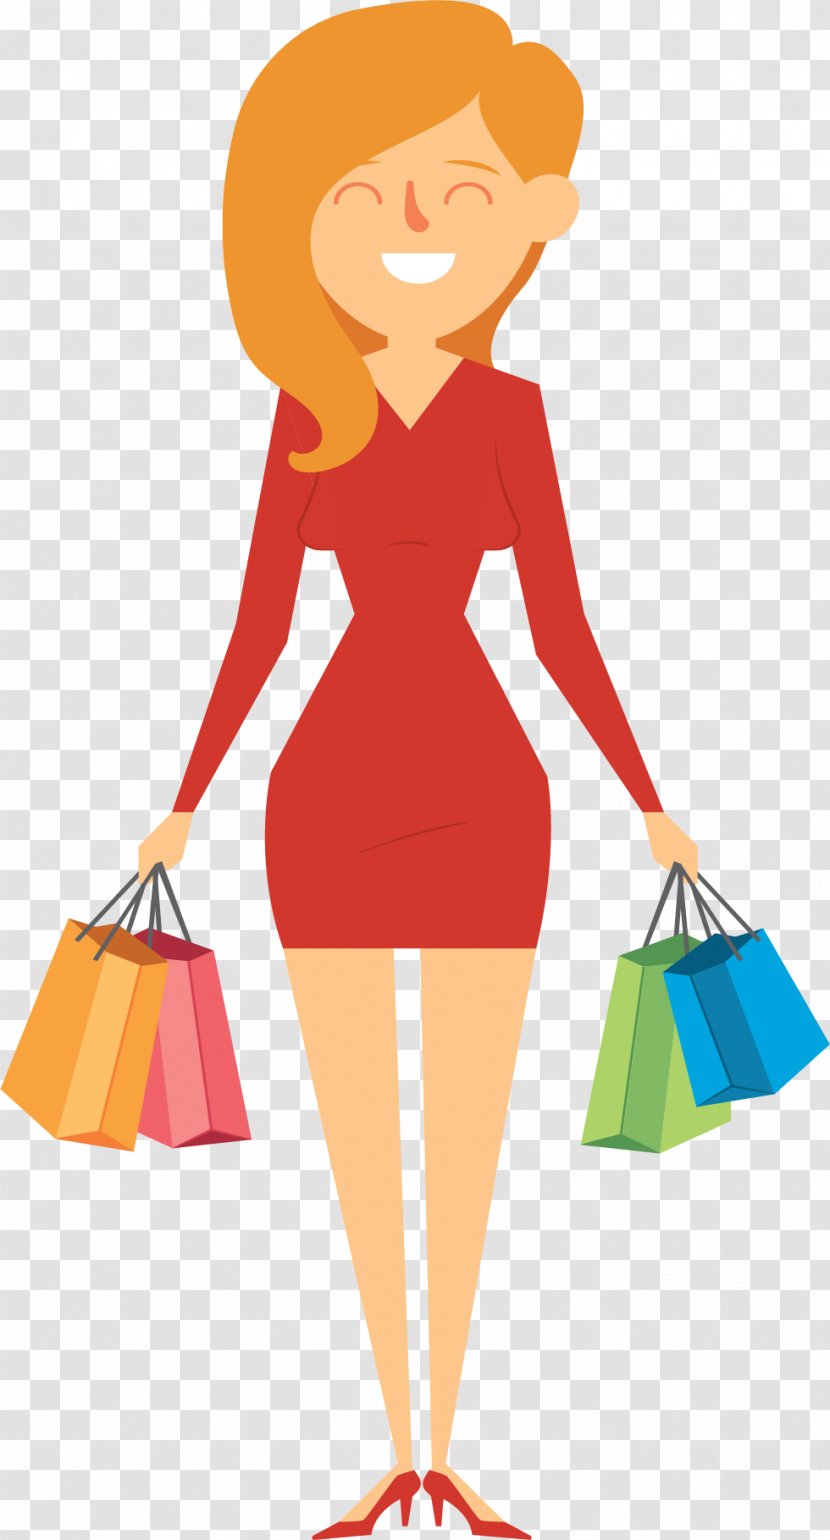 Shopping Illustration - Frame - Happy To Go For Women Transparent PNG